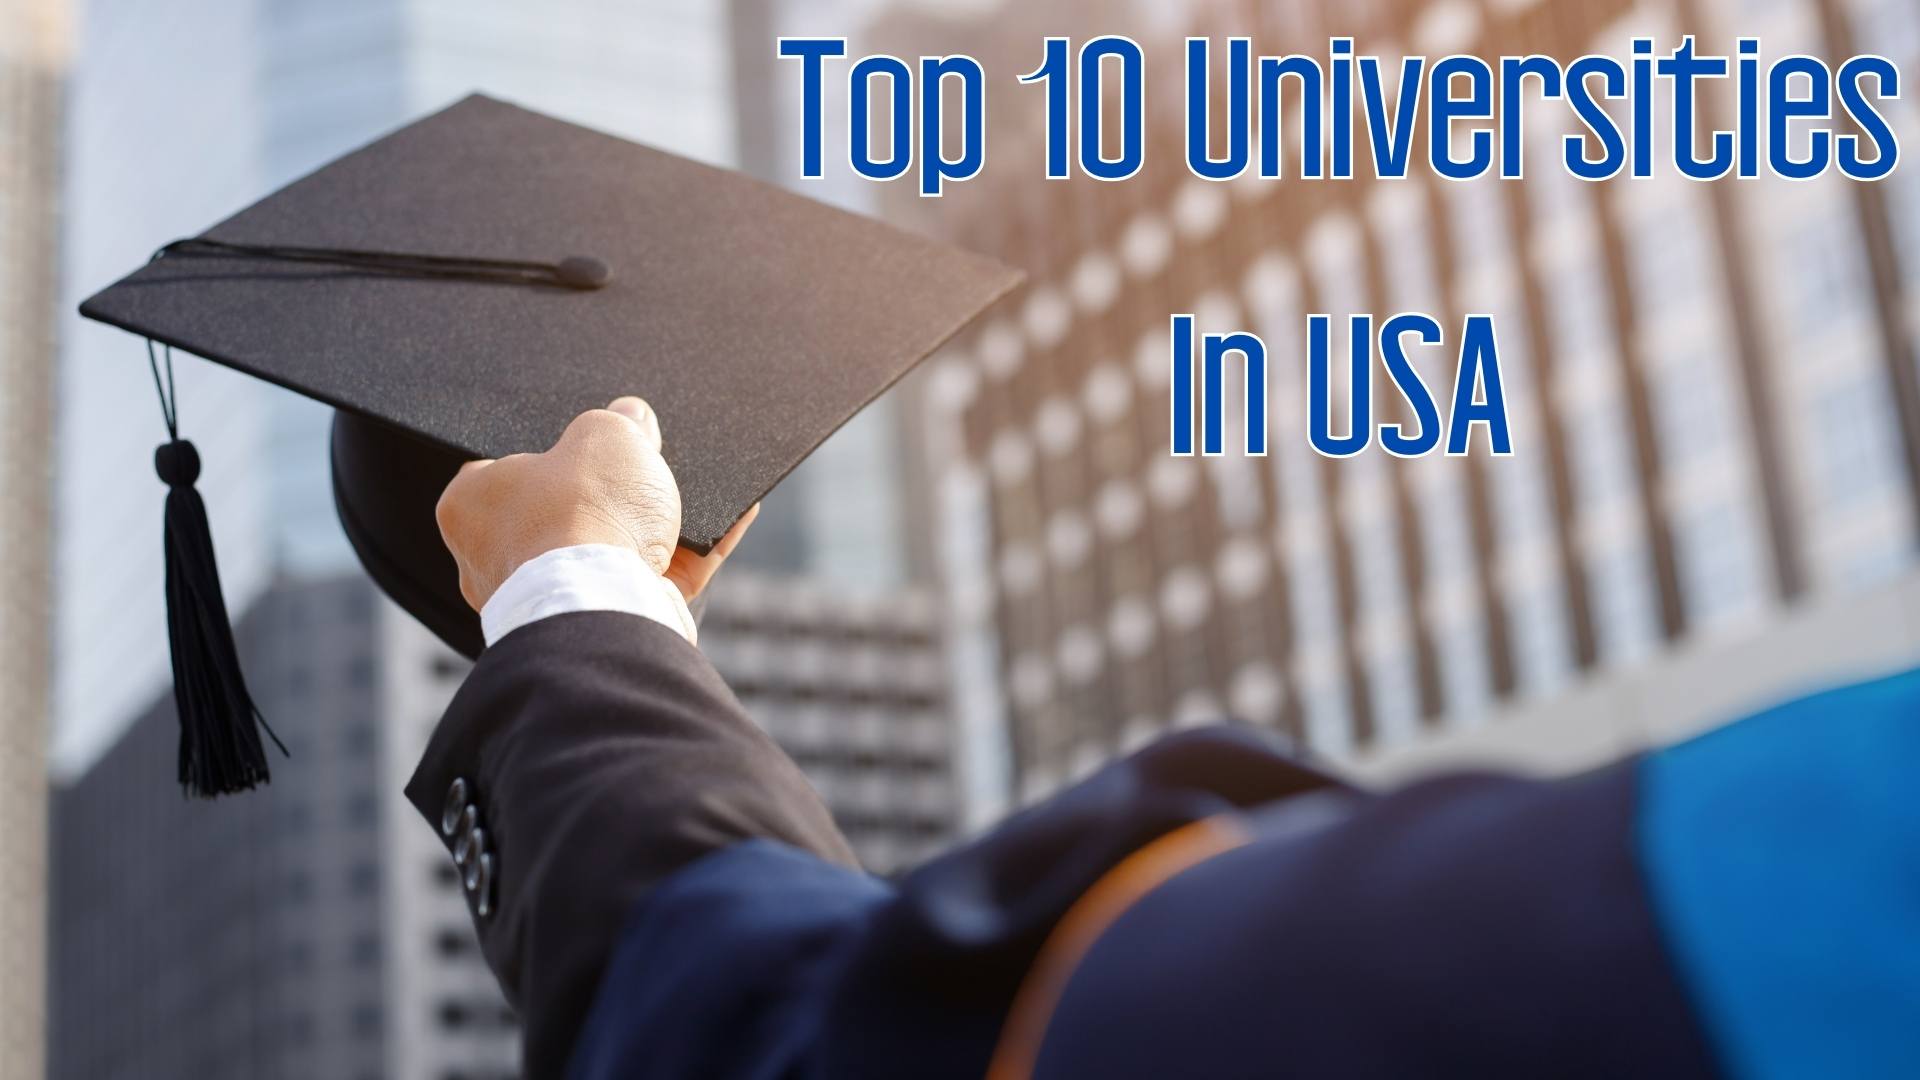 Top 10 Universities In USA, Buzzonnet